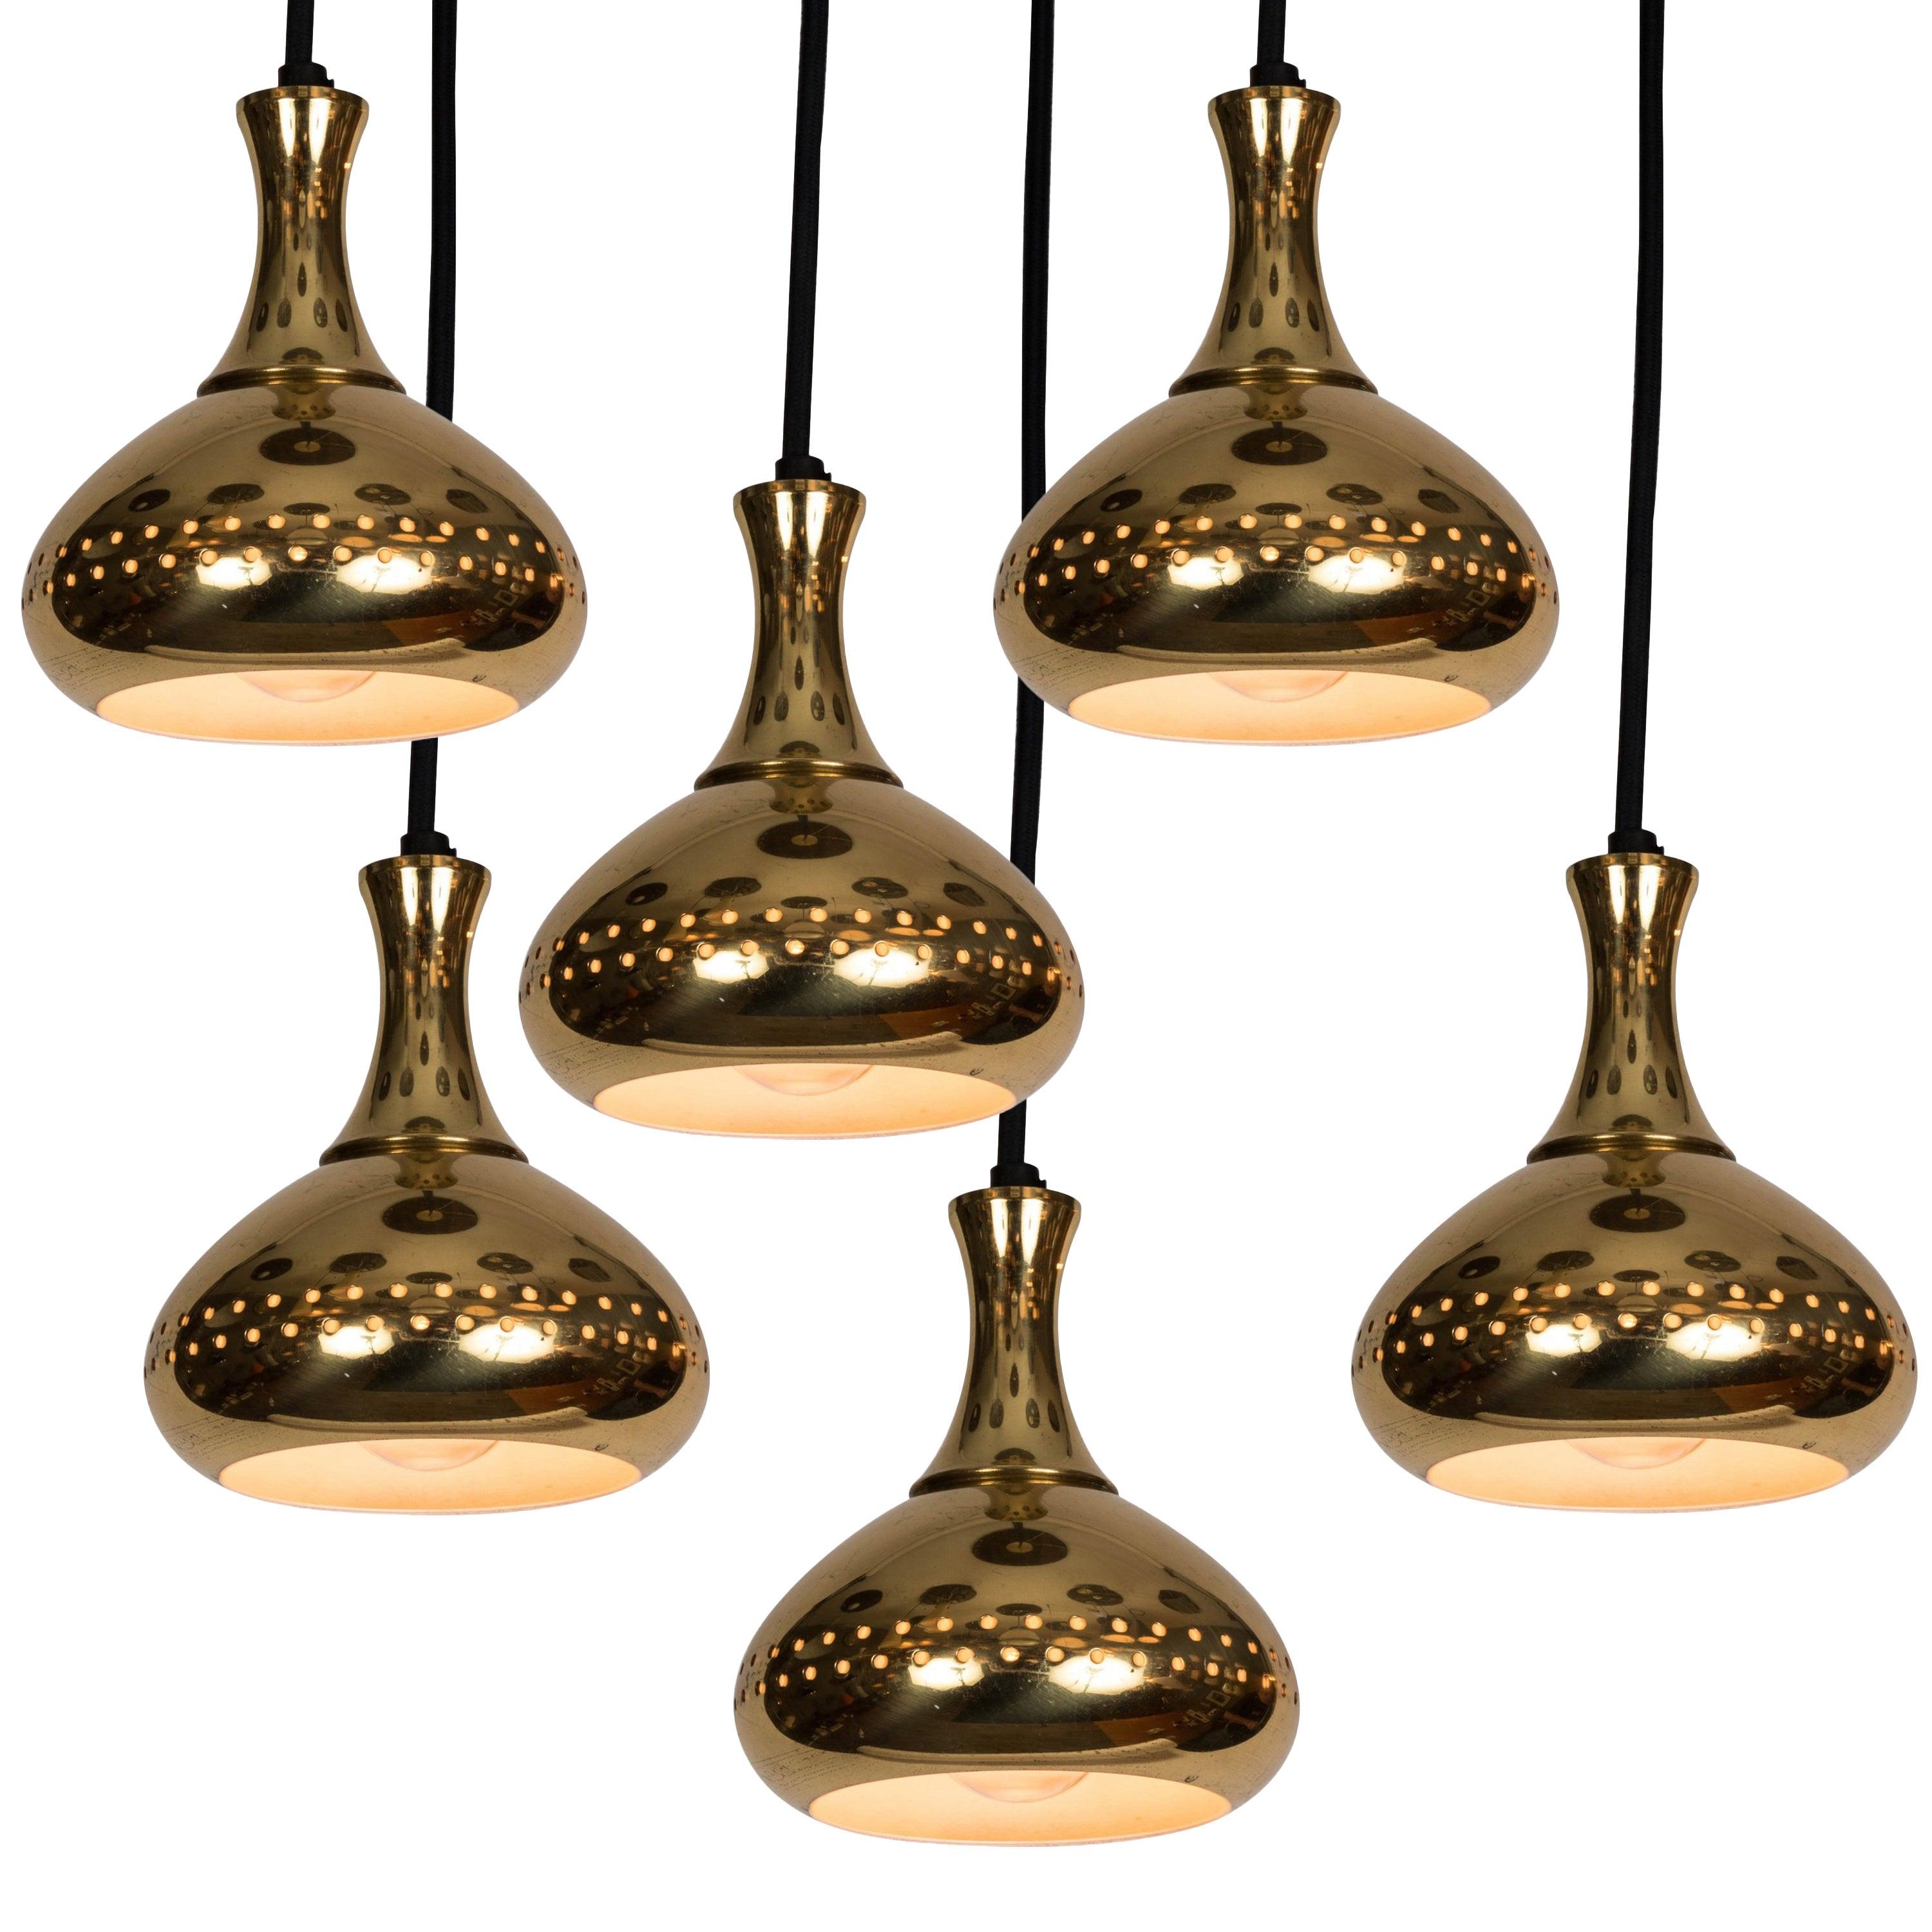 1950s Hans-Agne Jakobsson perforated brass pendants for Markaryd, Sweden. Graced with simple Scandinavian curves and pleasing brass patina. Professionally rewired for US electrical. Height is readily adjustable to desired length. Original